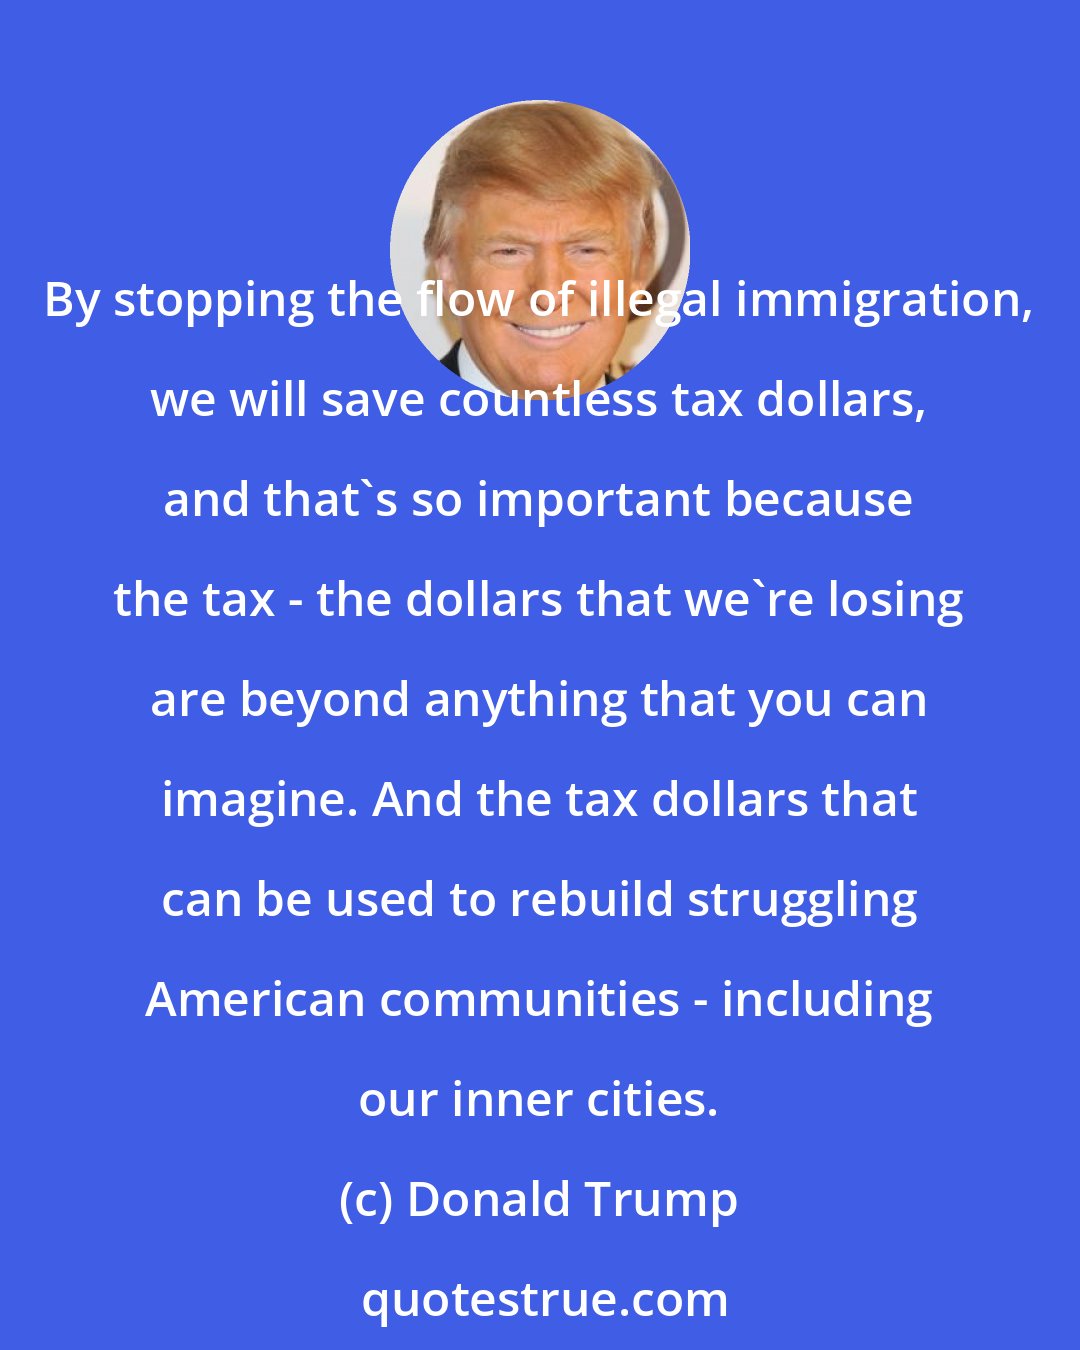 Donald Trump: By stopping the flow of illegal immigration, we will save countless tax dollars, and that's so important because the tax - the dollars that we're losing are beyond anything that you can imagine. And the tax dollars that can be used to rebuild struggling American communities - including our inner cities.